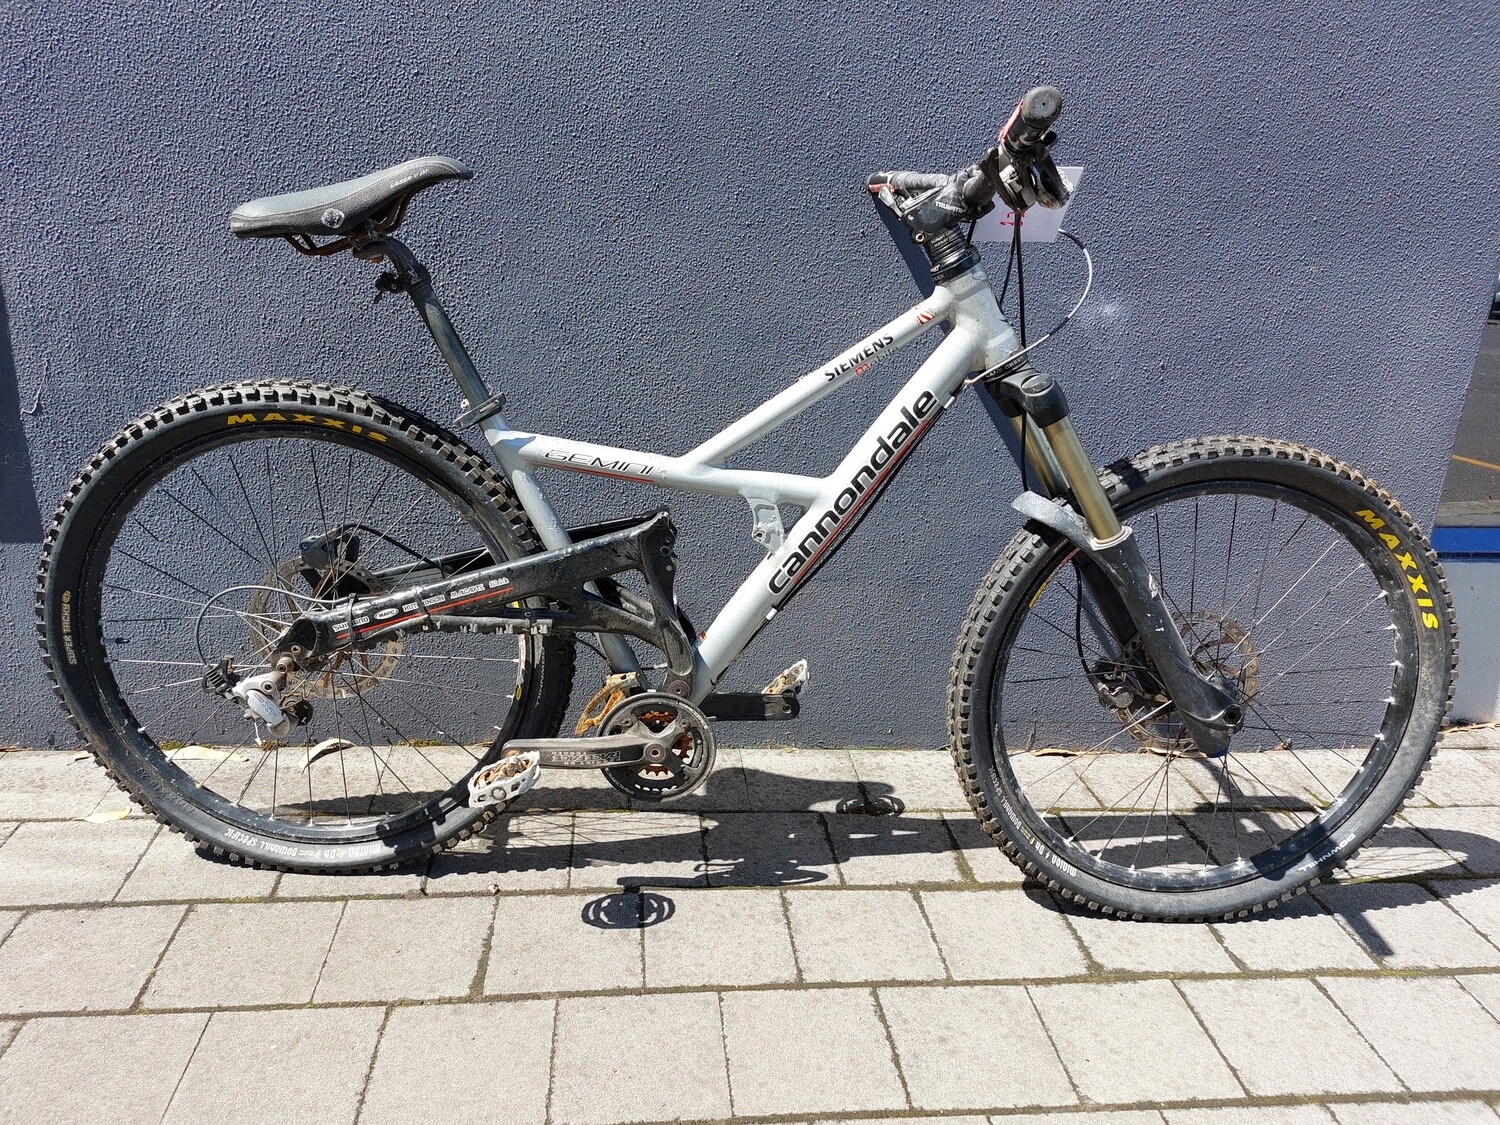 M/L - Mountain Bike - Cannondale, Gemini - DIY Vintage Project - SOLD AS IS